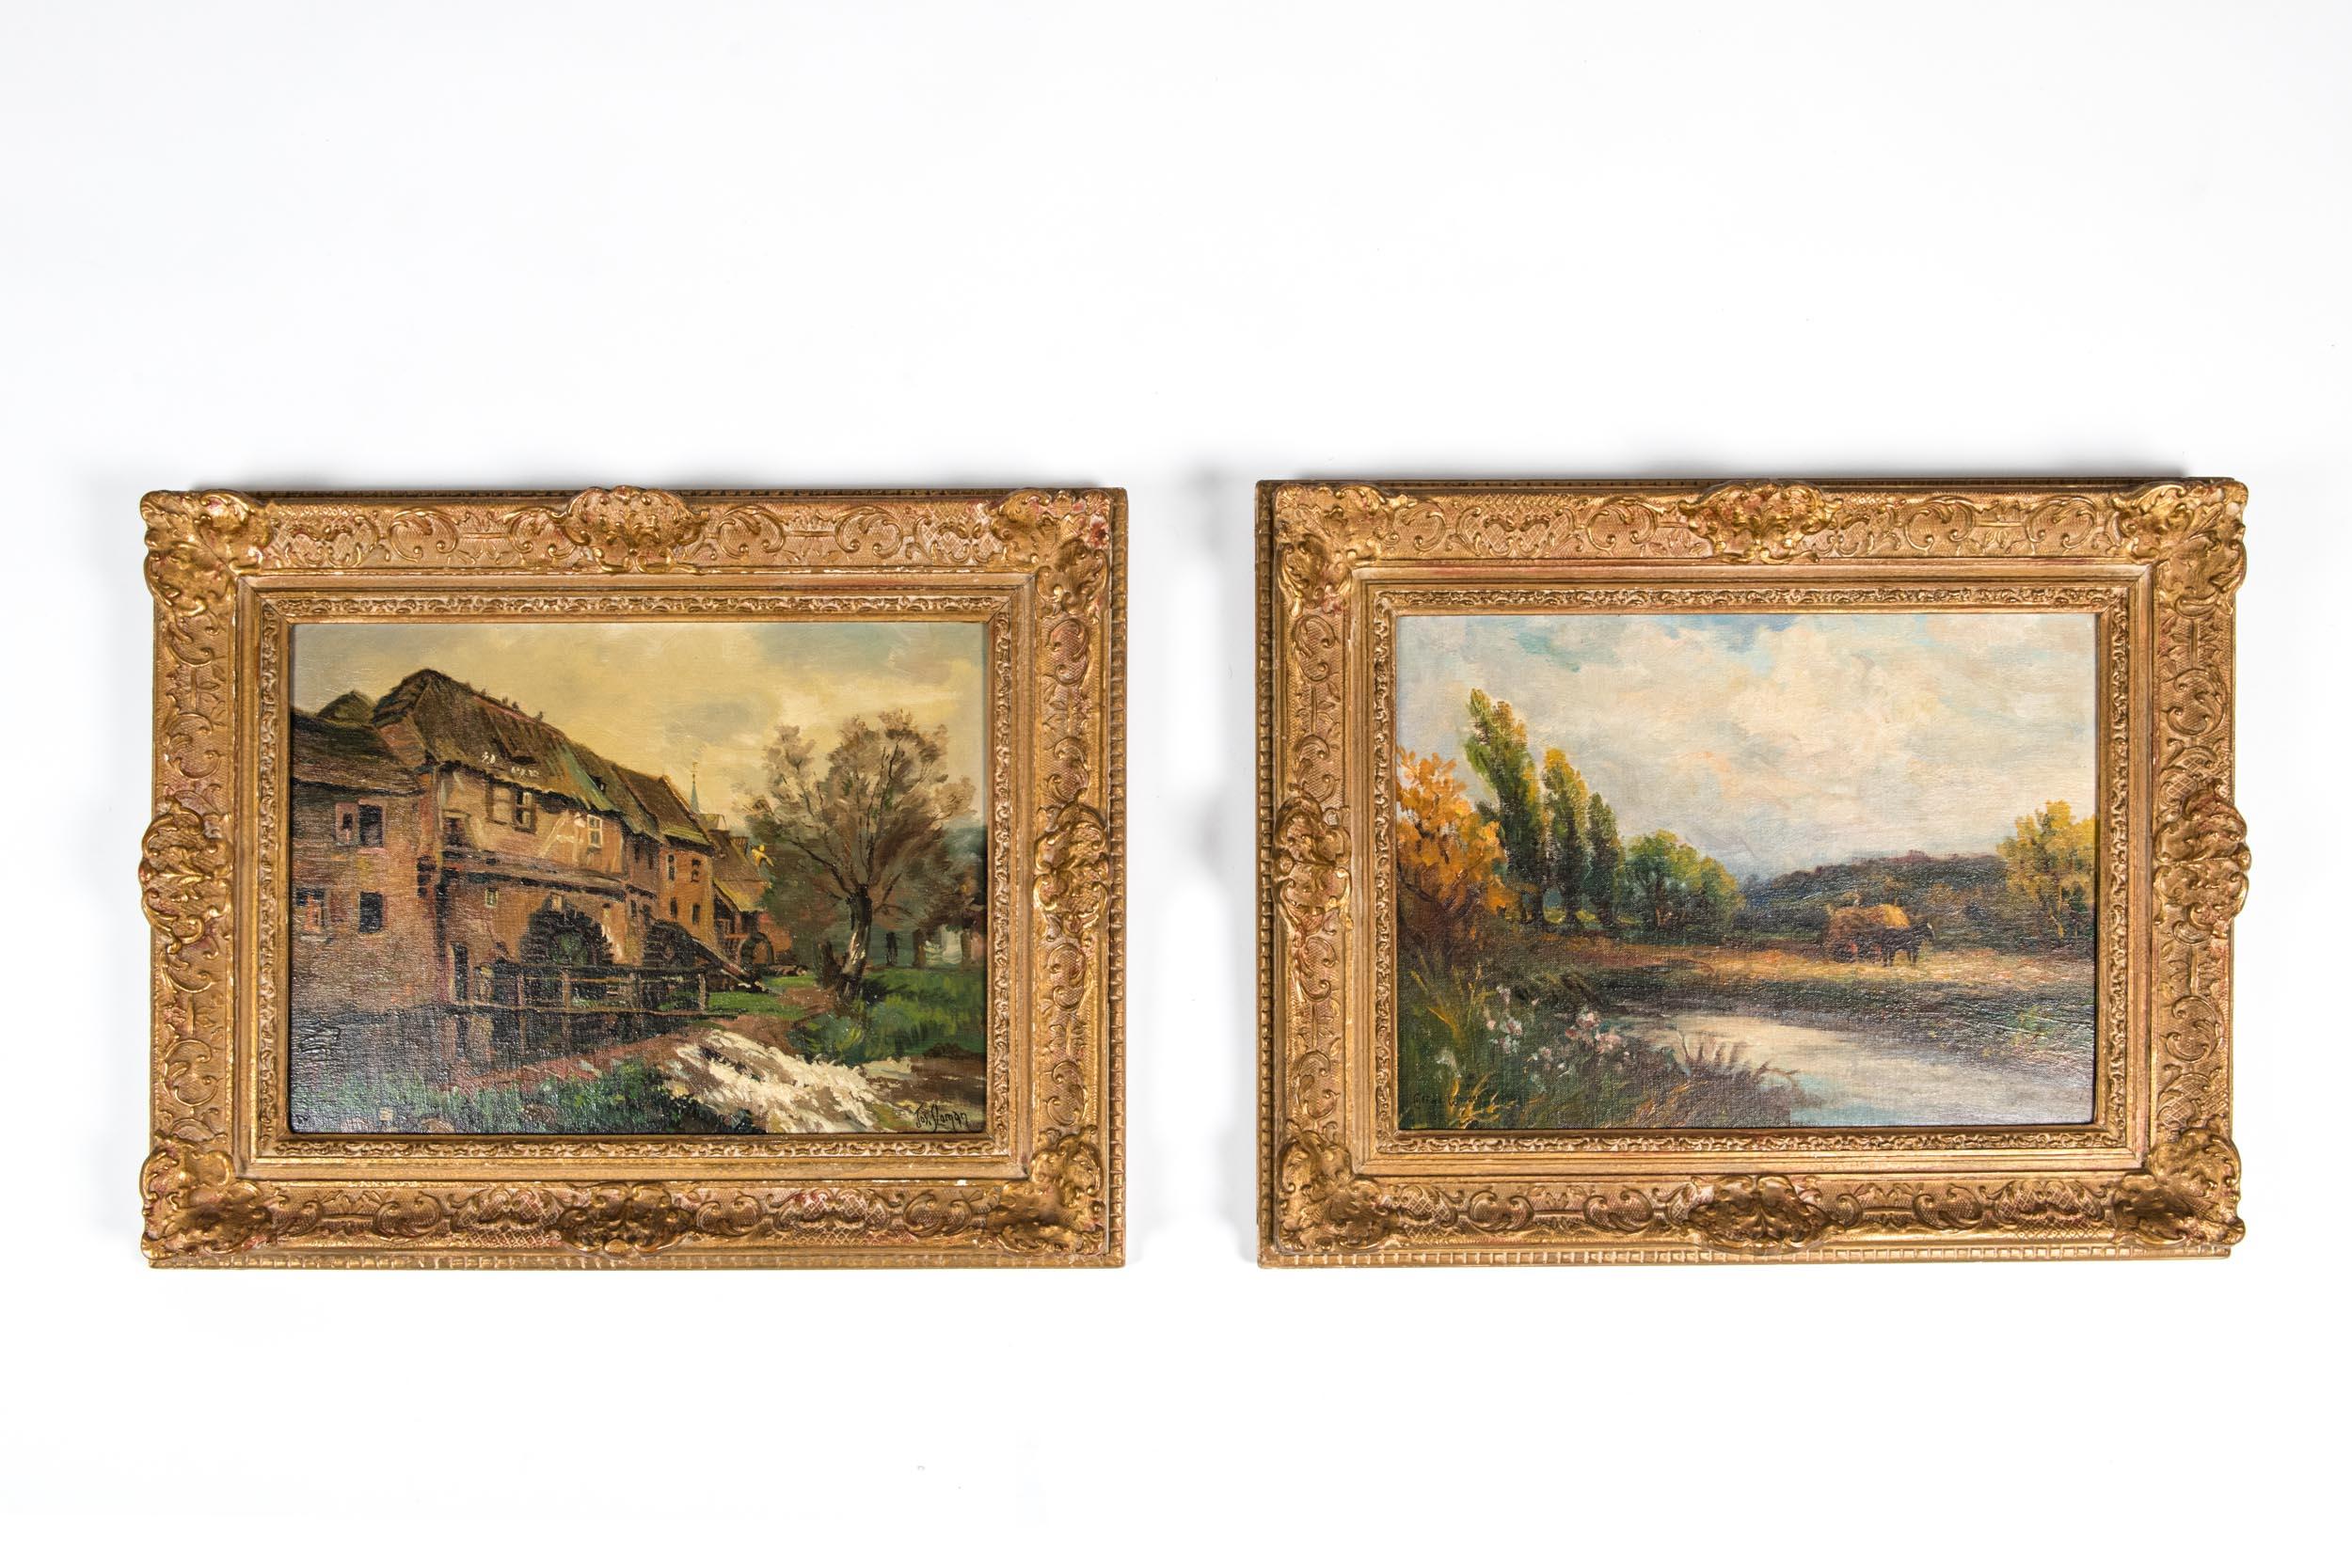 Antique pair late 19th century oil painting on board with gilt wood frame. Each painting is in excellent antique condition. Minor wear to the frame consistent with age or use. Artist signature on each painting lower left. Each one measure about 21